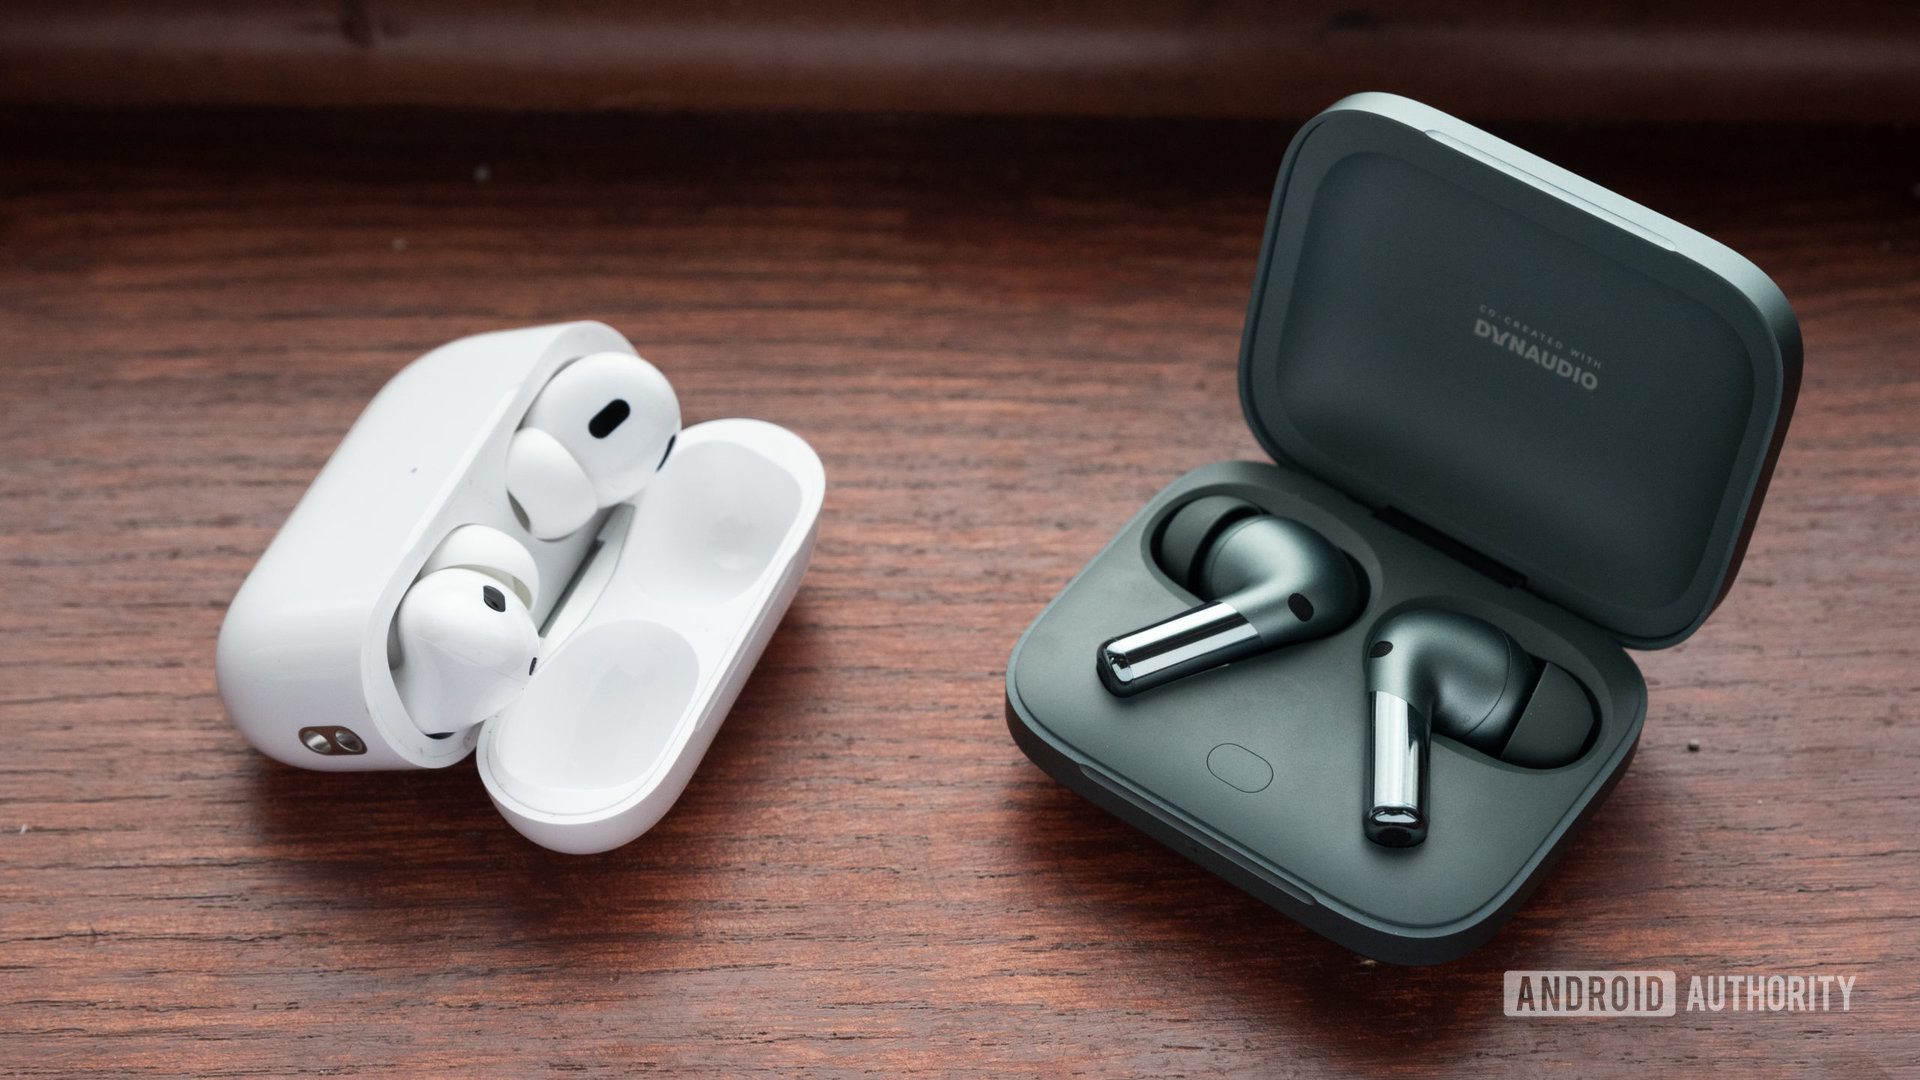 The Apple AirPods Pro (2nd generation) next to the OnePlus Buds Pro 2 wireless earbuds.